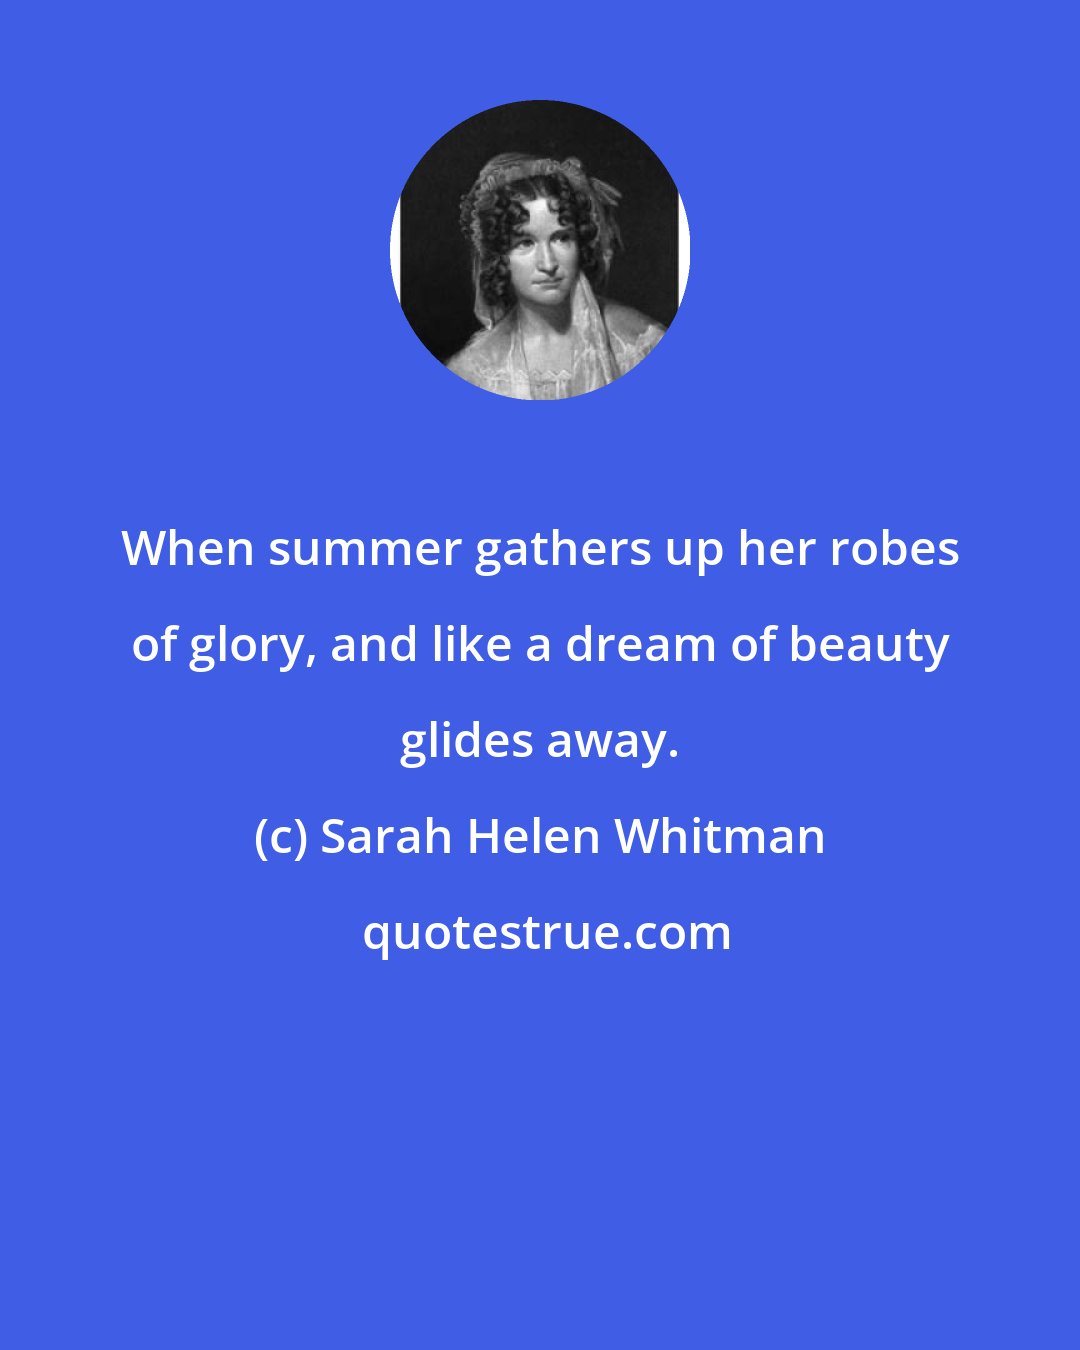 Sarah Helen Whitman: When summer gathers up her robes of glory, and like a dream of beauty glides away.